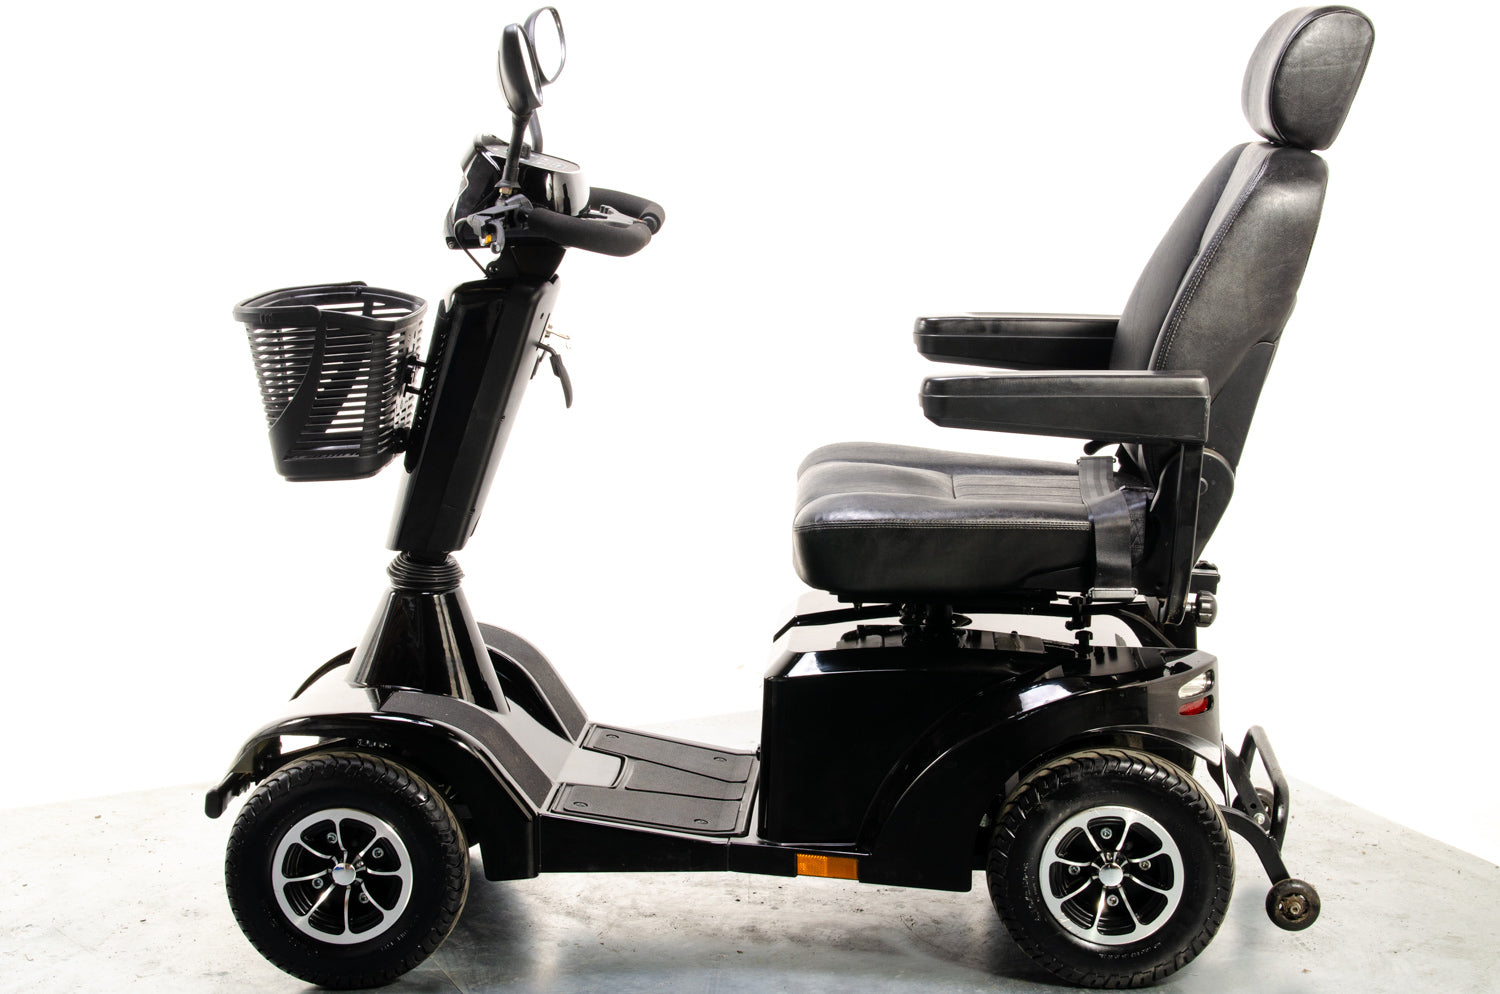 Sterling S700 Used Mobility Scooter Large 8mpoh All-Terrain Sunrise Medical Black 13078